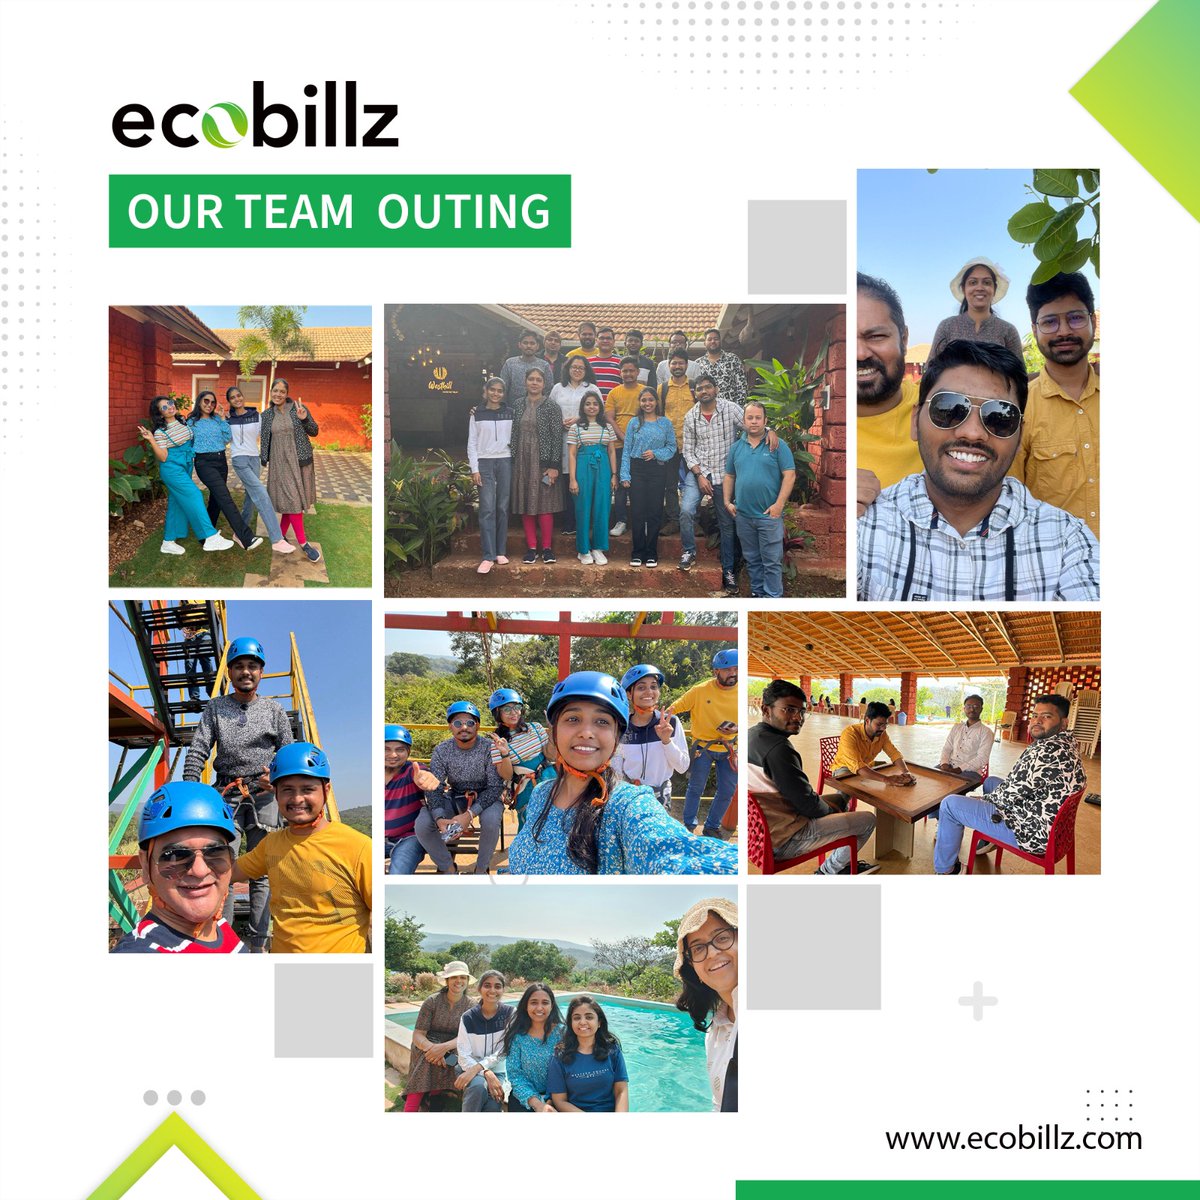 @Ecobillz Private Limited we work very hard and we have some recharging, re-energizing and relaxing sessions also!! #workhard #workhardplayhard #automation #automationsolutions #hospitality #retail #hospitalitytechnology #retailtechnology #hospitalitytech #retailtech #team